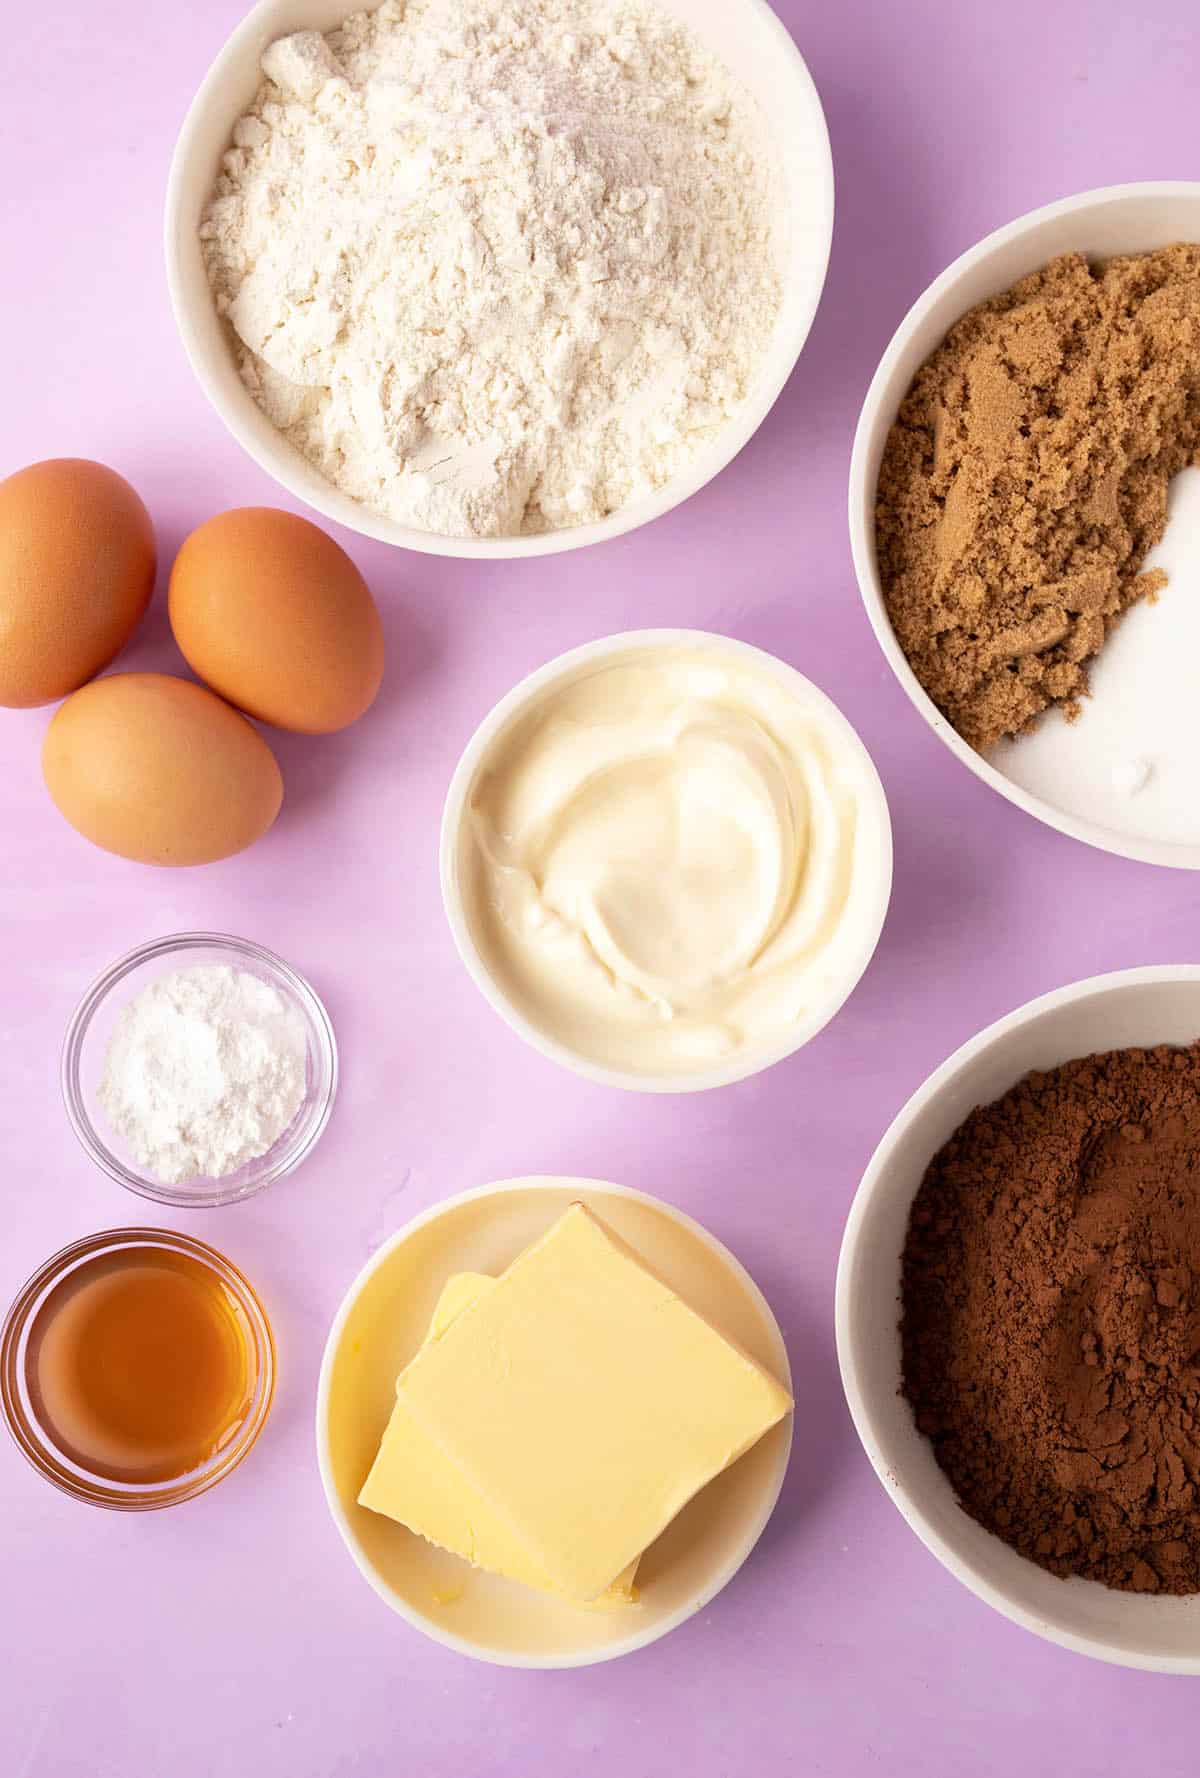 All the ingredients needed to make a chocolate cake from scratch on a purple background. 